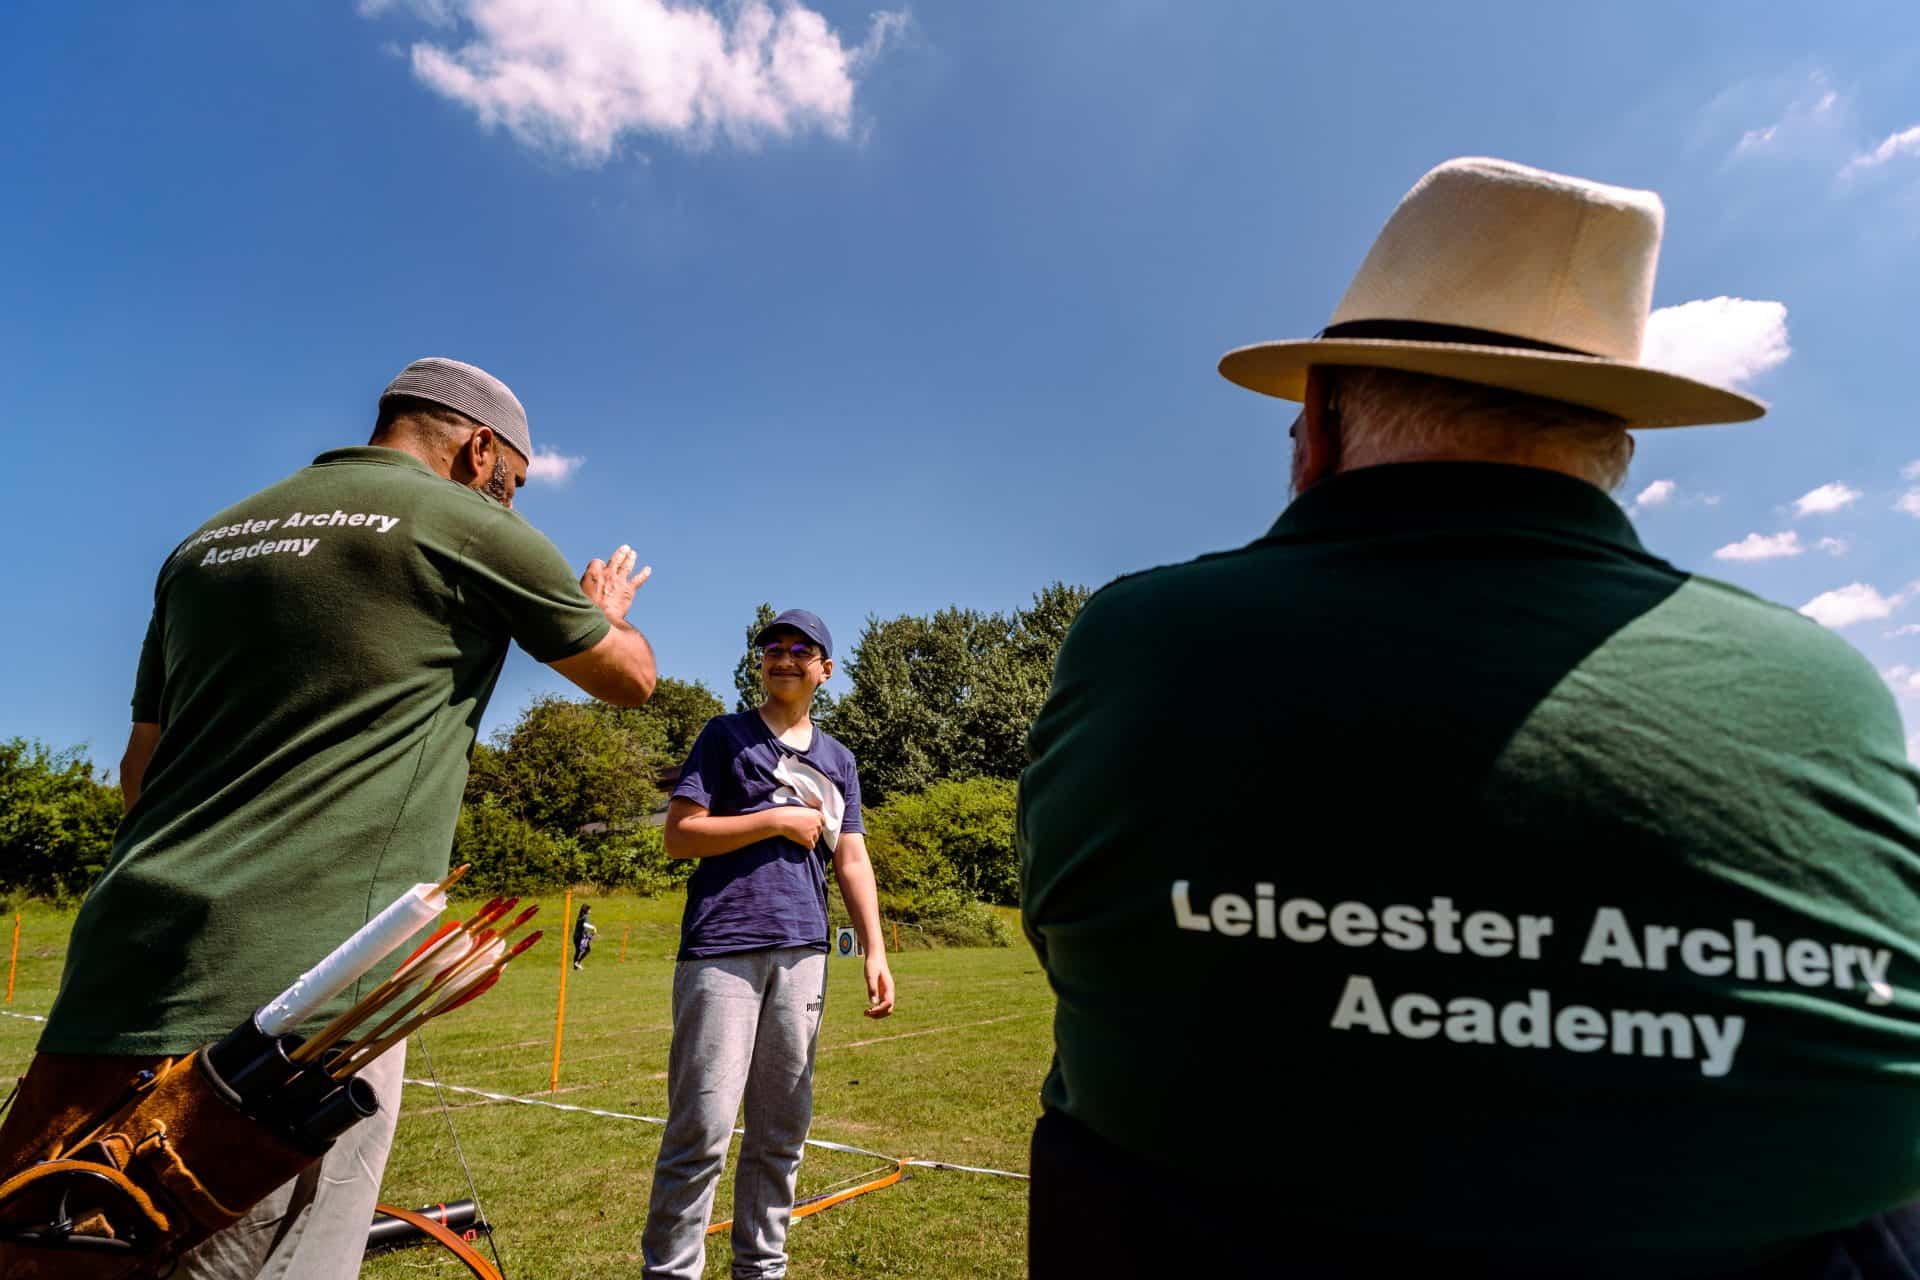 Coaches helping a beginner at Leicester Archery Academy